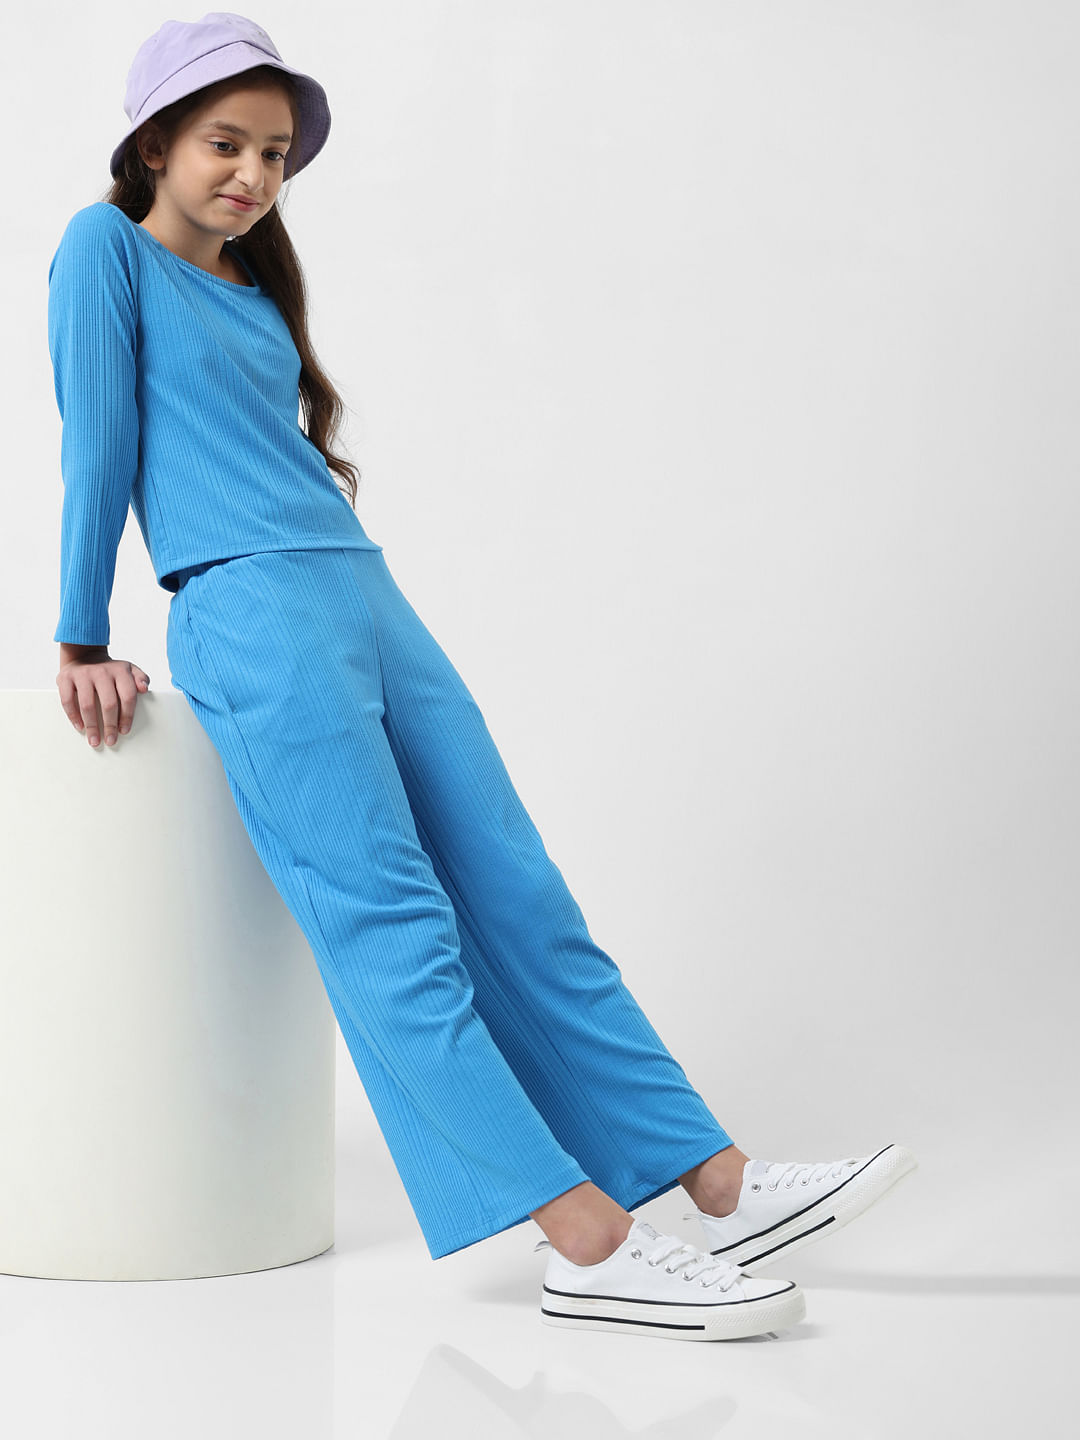 Buy AND GIRL Blue Solid Polyester Regular Fit Girls Pant | Shoppers Stop